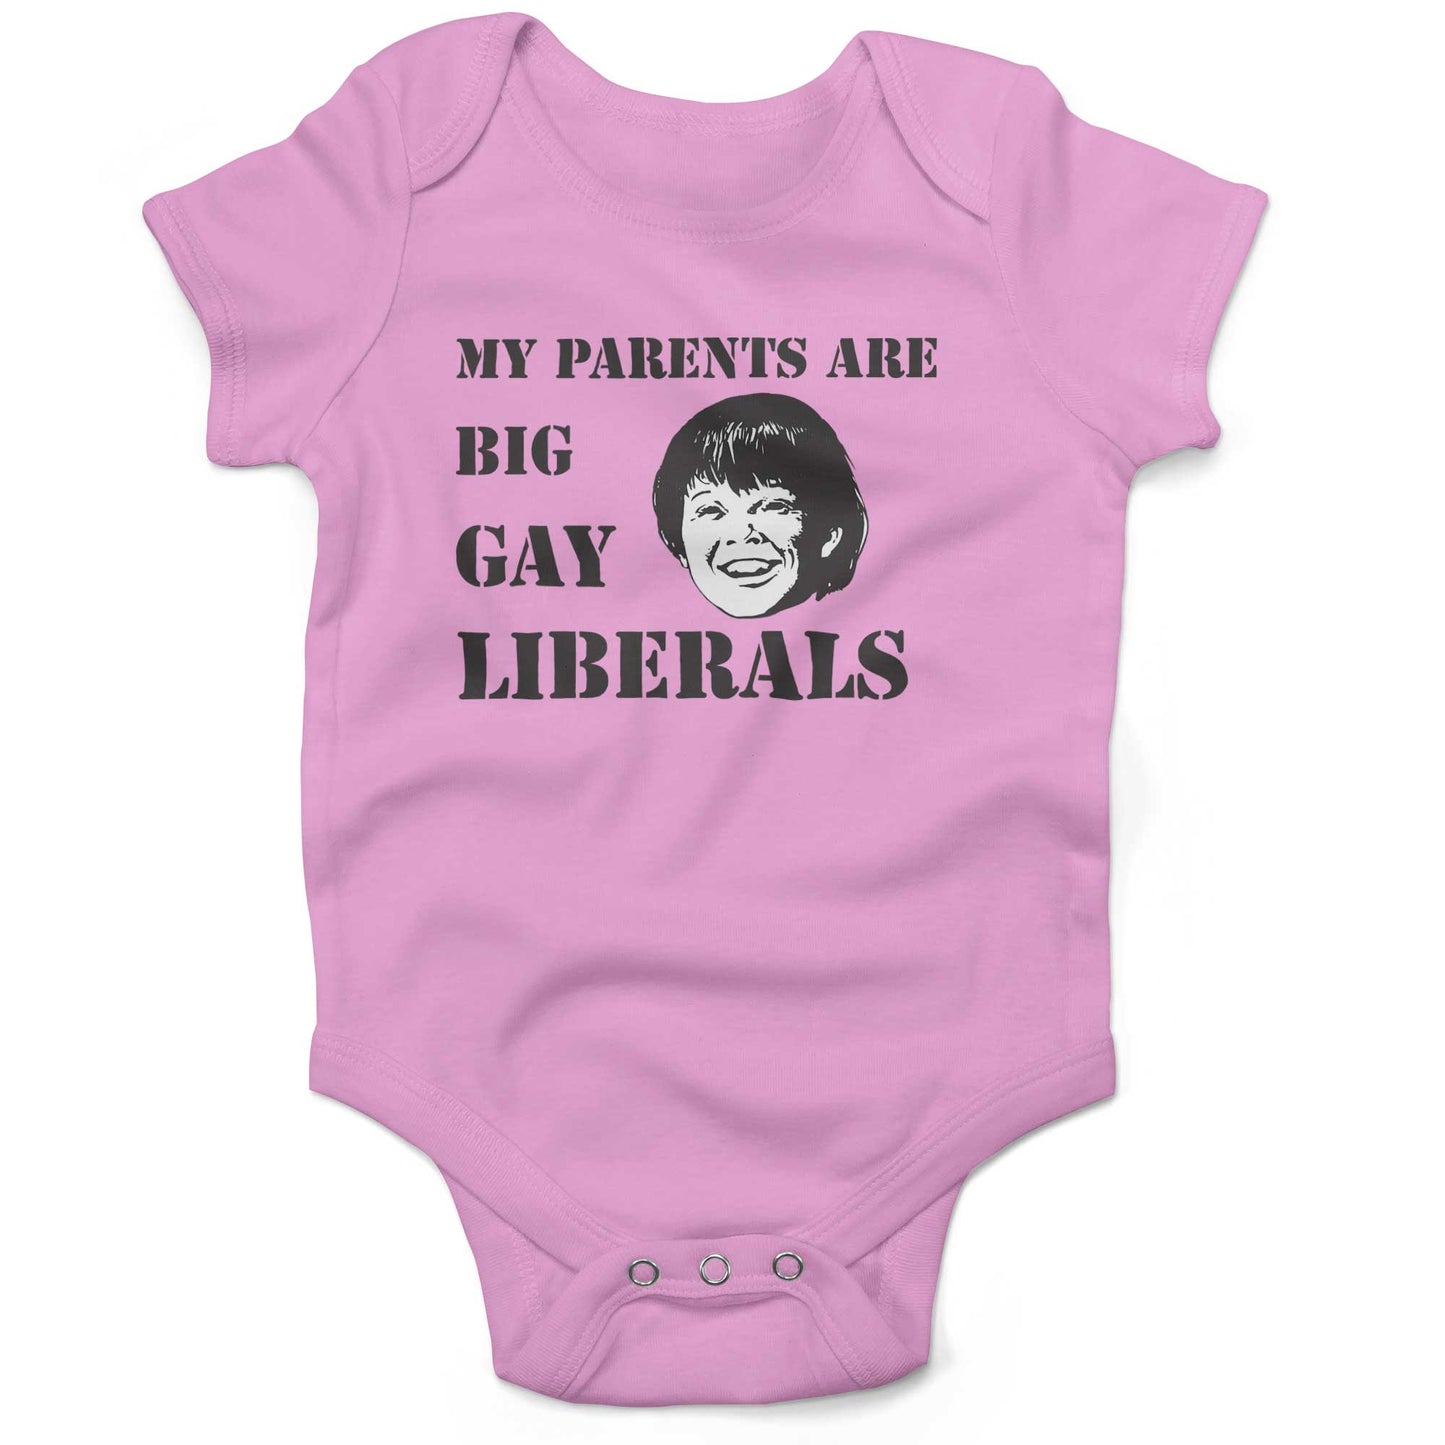 My Parents Are Big, Gay Liberals Infant Bodysuit or Raglan Baby Tee-Organic Pink-3-6 months